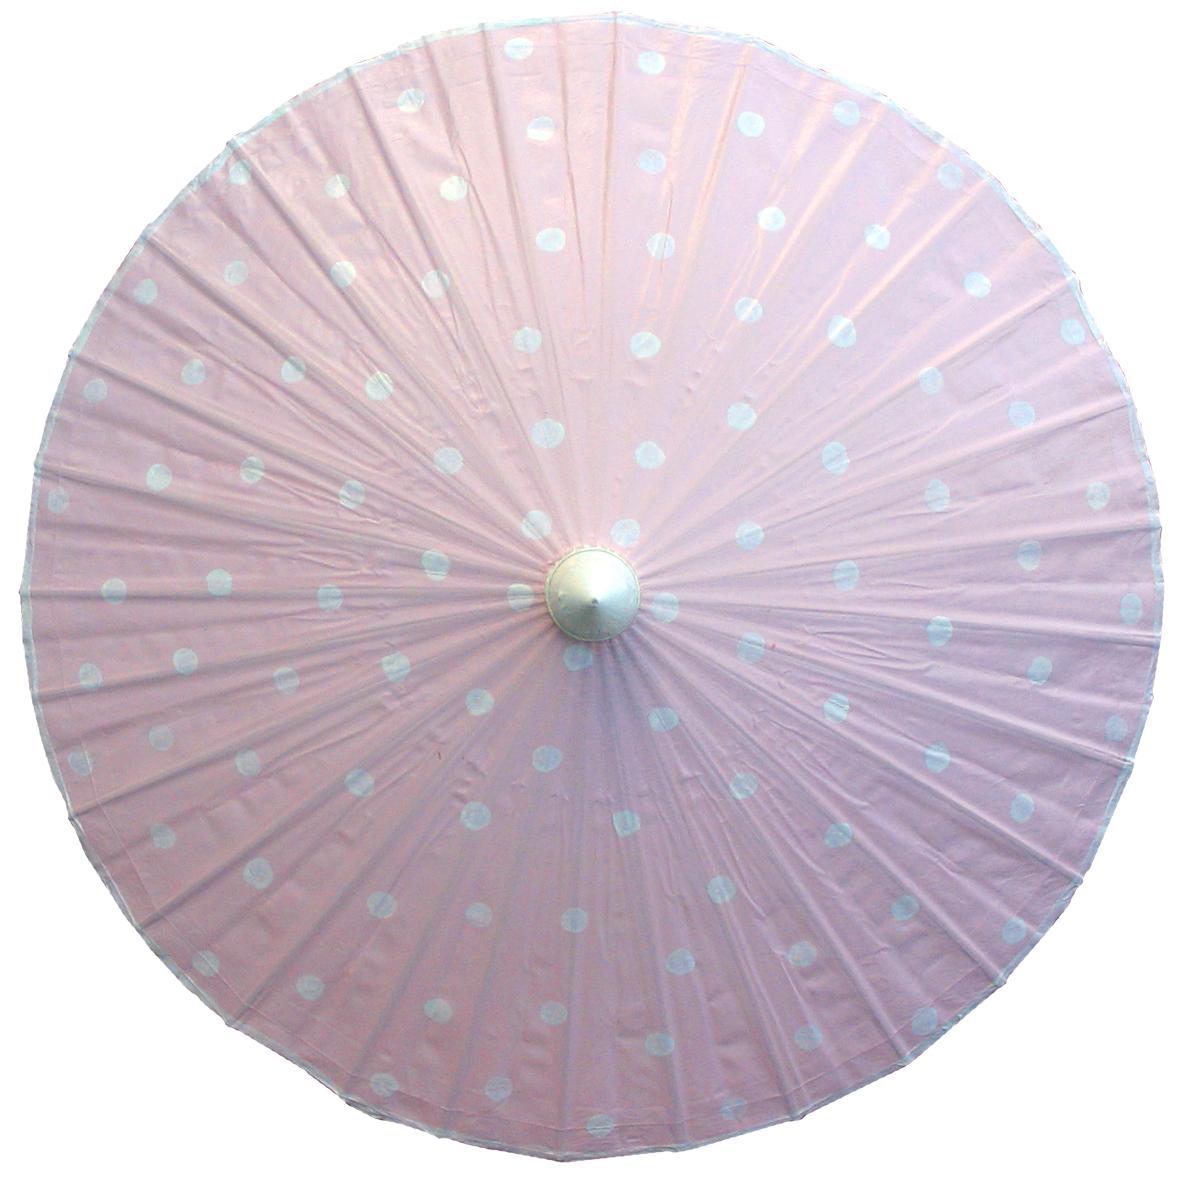 82cm Pale Pink with White